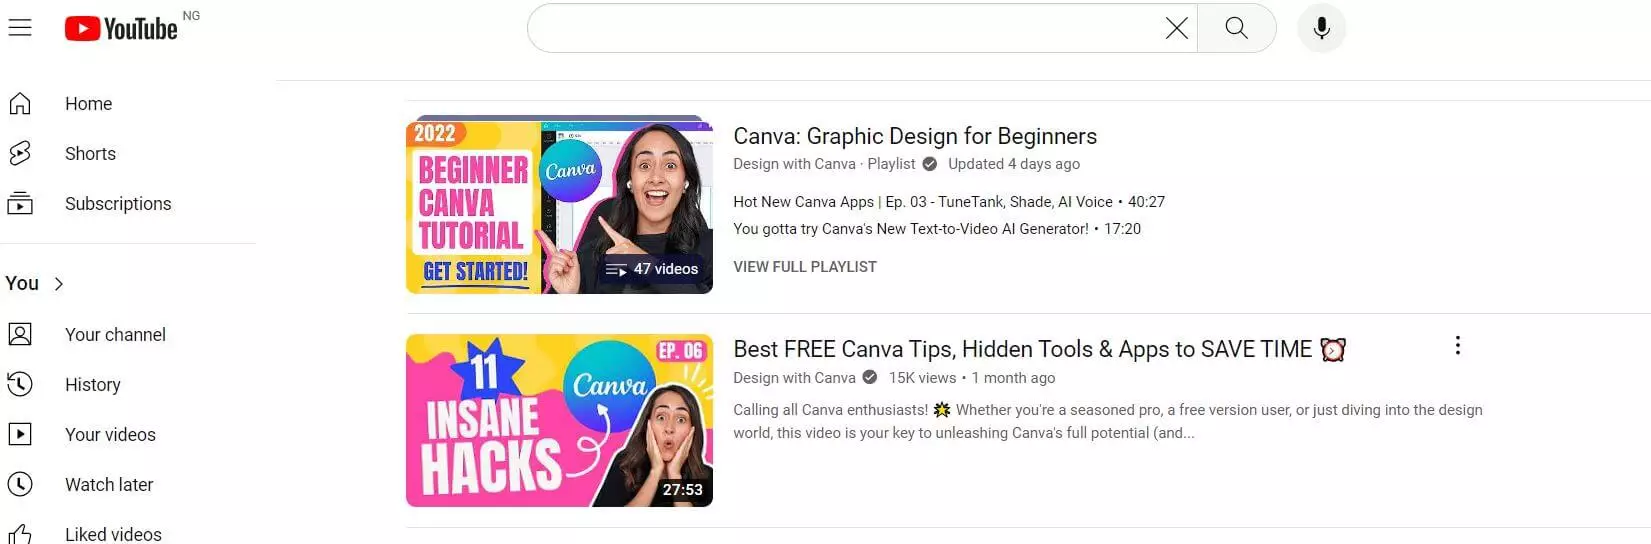 Canva design video tips on youtube